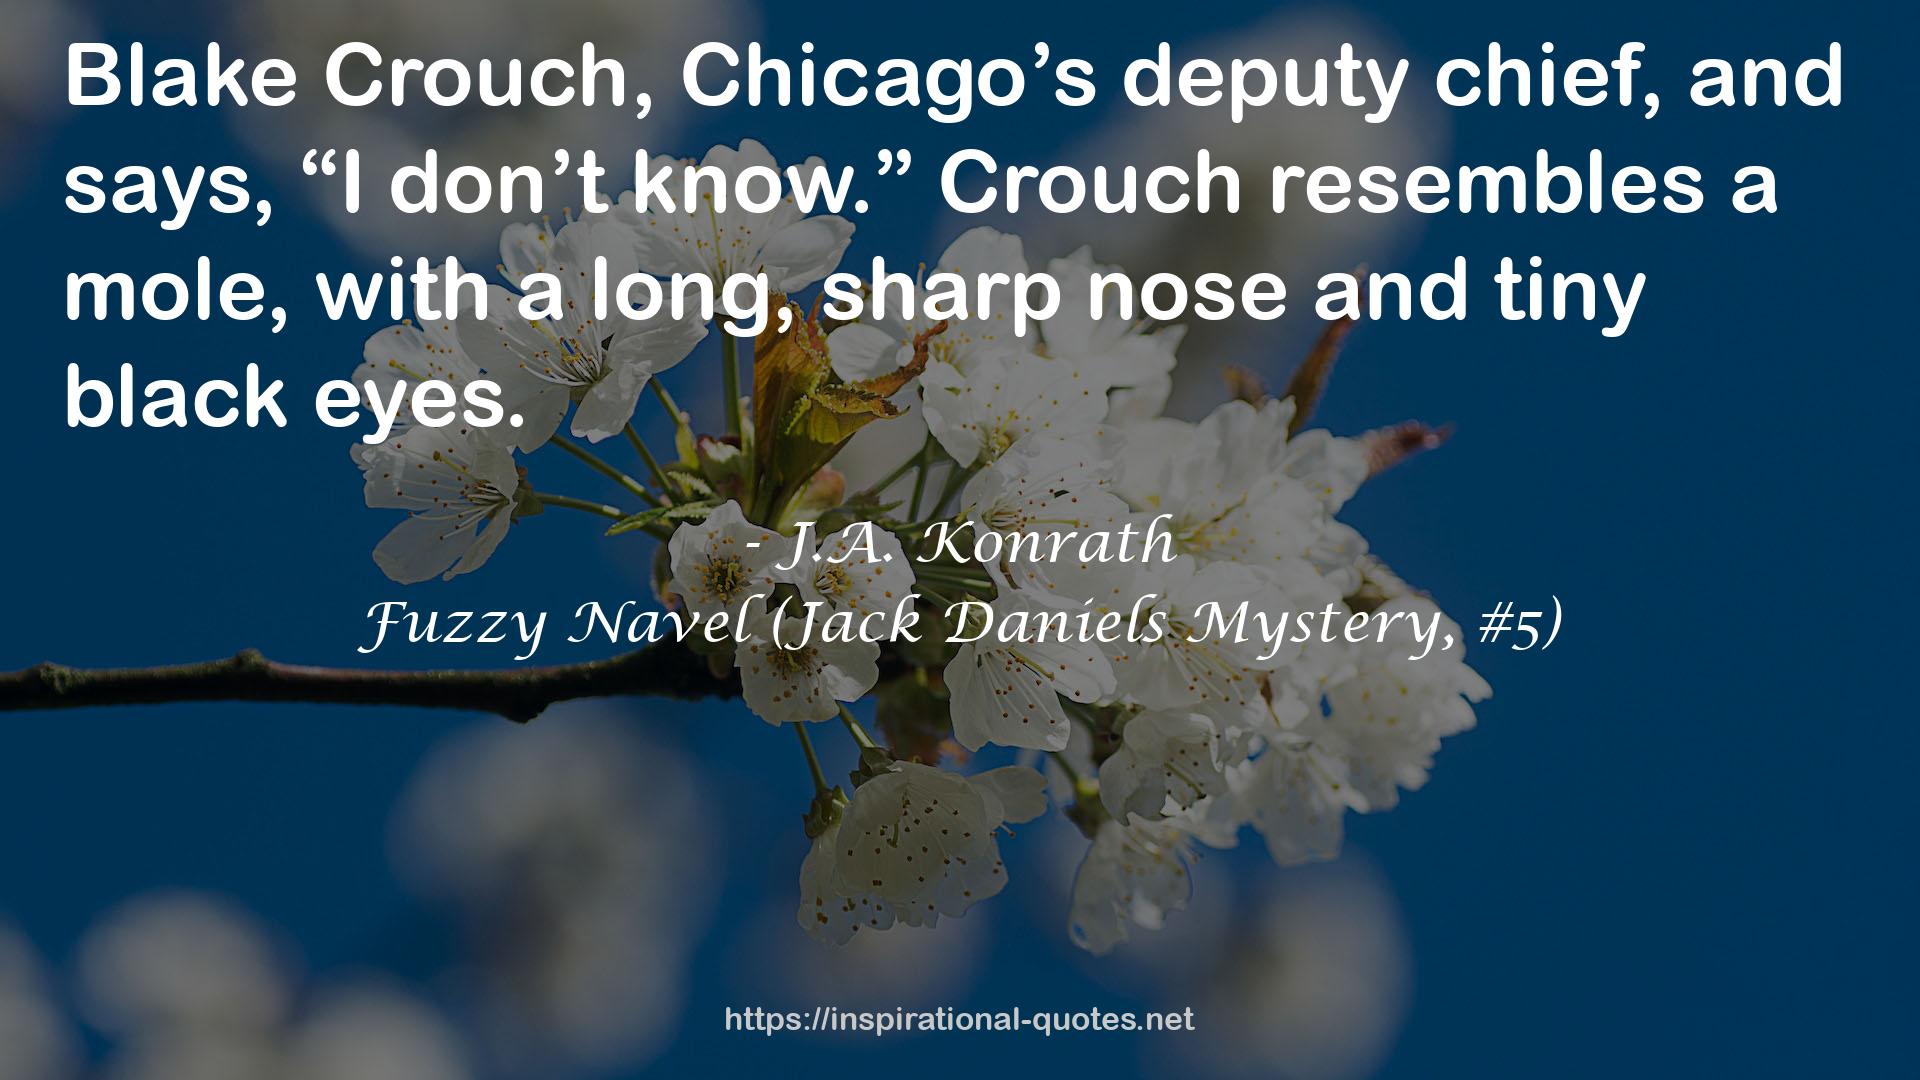 Fuzzy Navel (Jack Daniels Mystery, #5) QUOTES